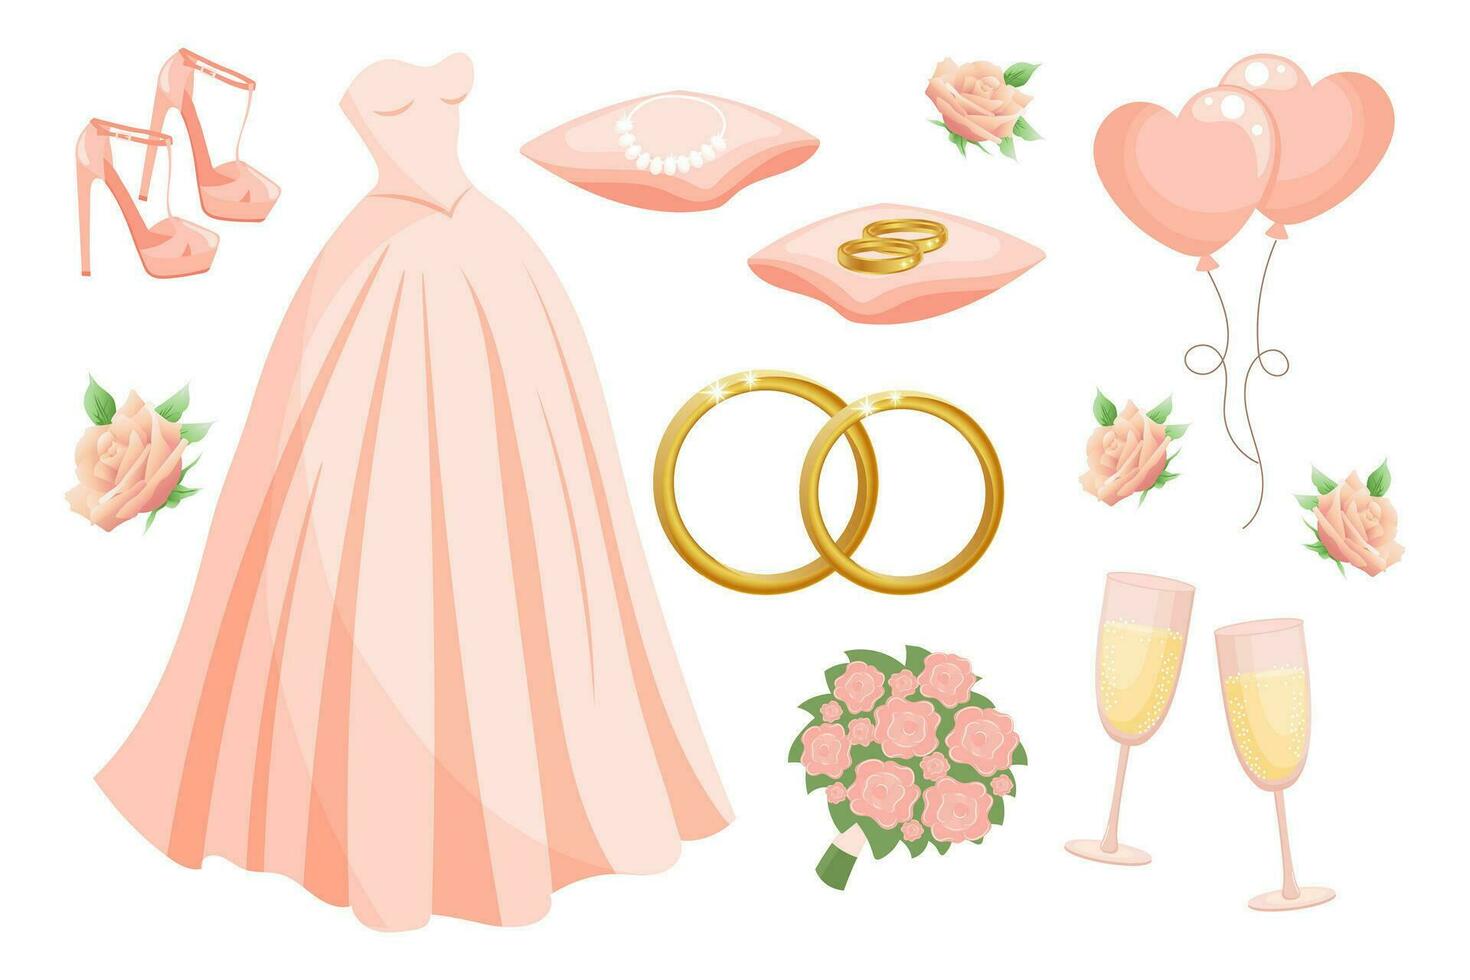 Wedding set of clothes and accessories for the bride, wedding dress, rings, necklace, shoes, glasses of champagne, bridal bouquet, balloons. Design elements, vector